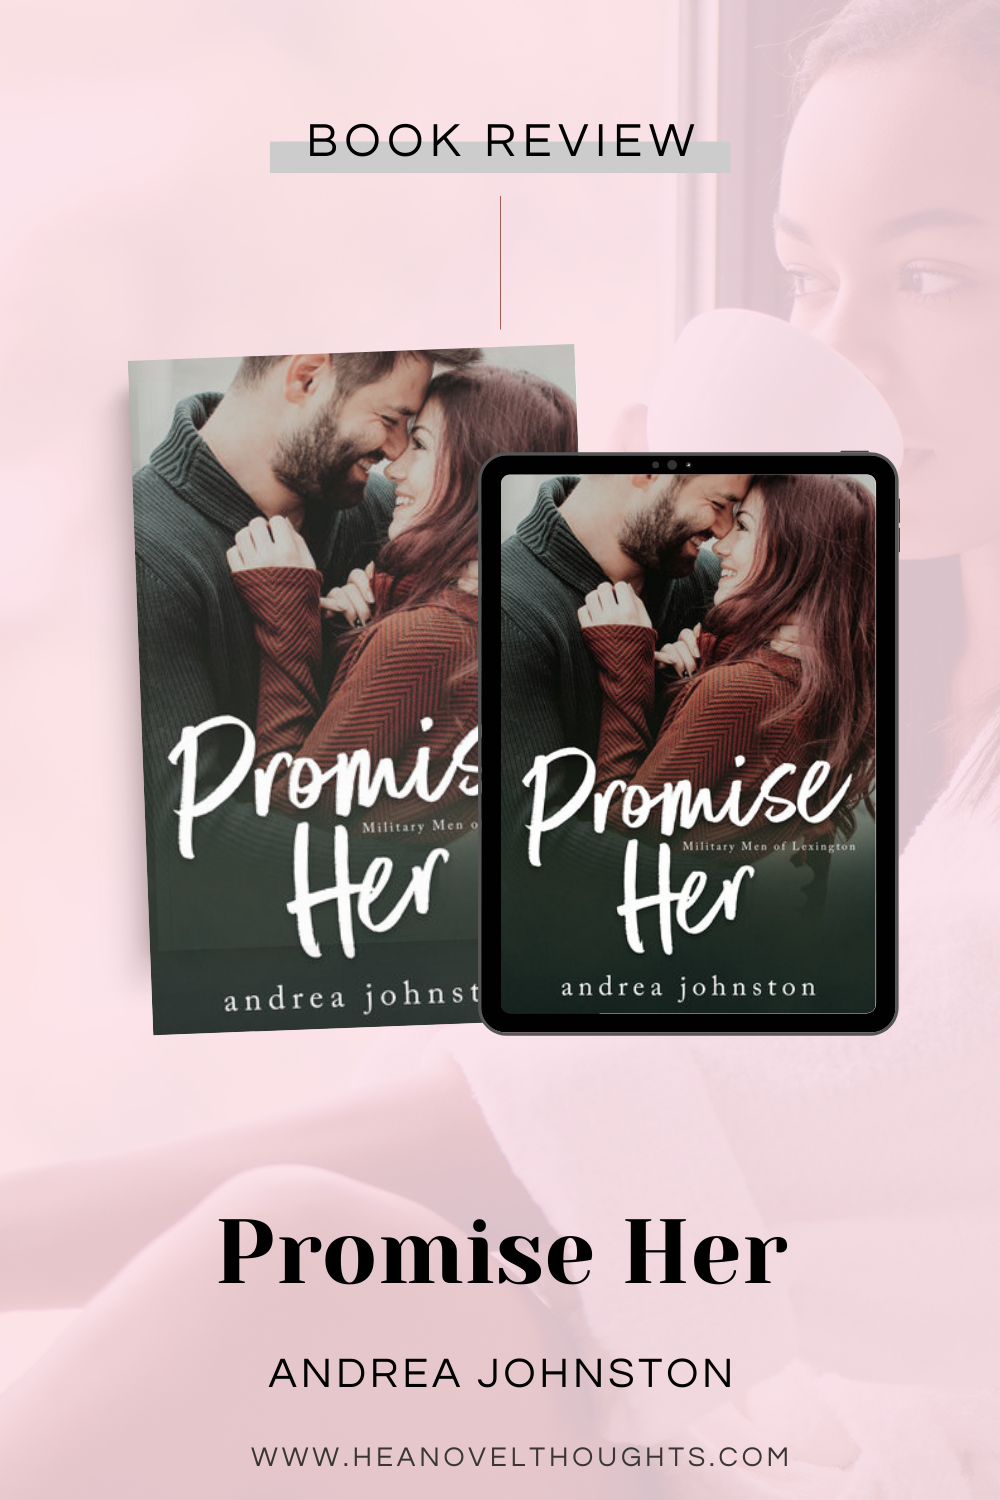 Promise Her by Andrea Johnston